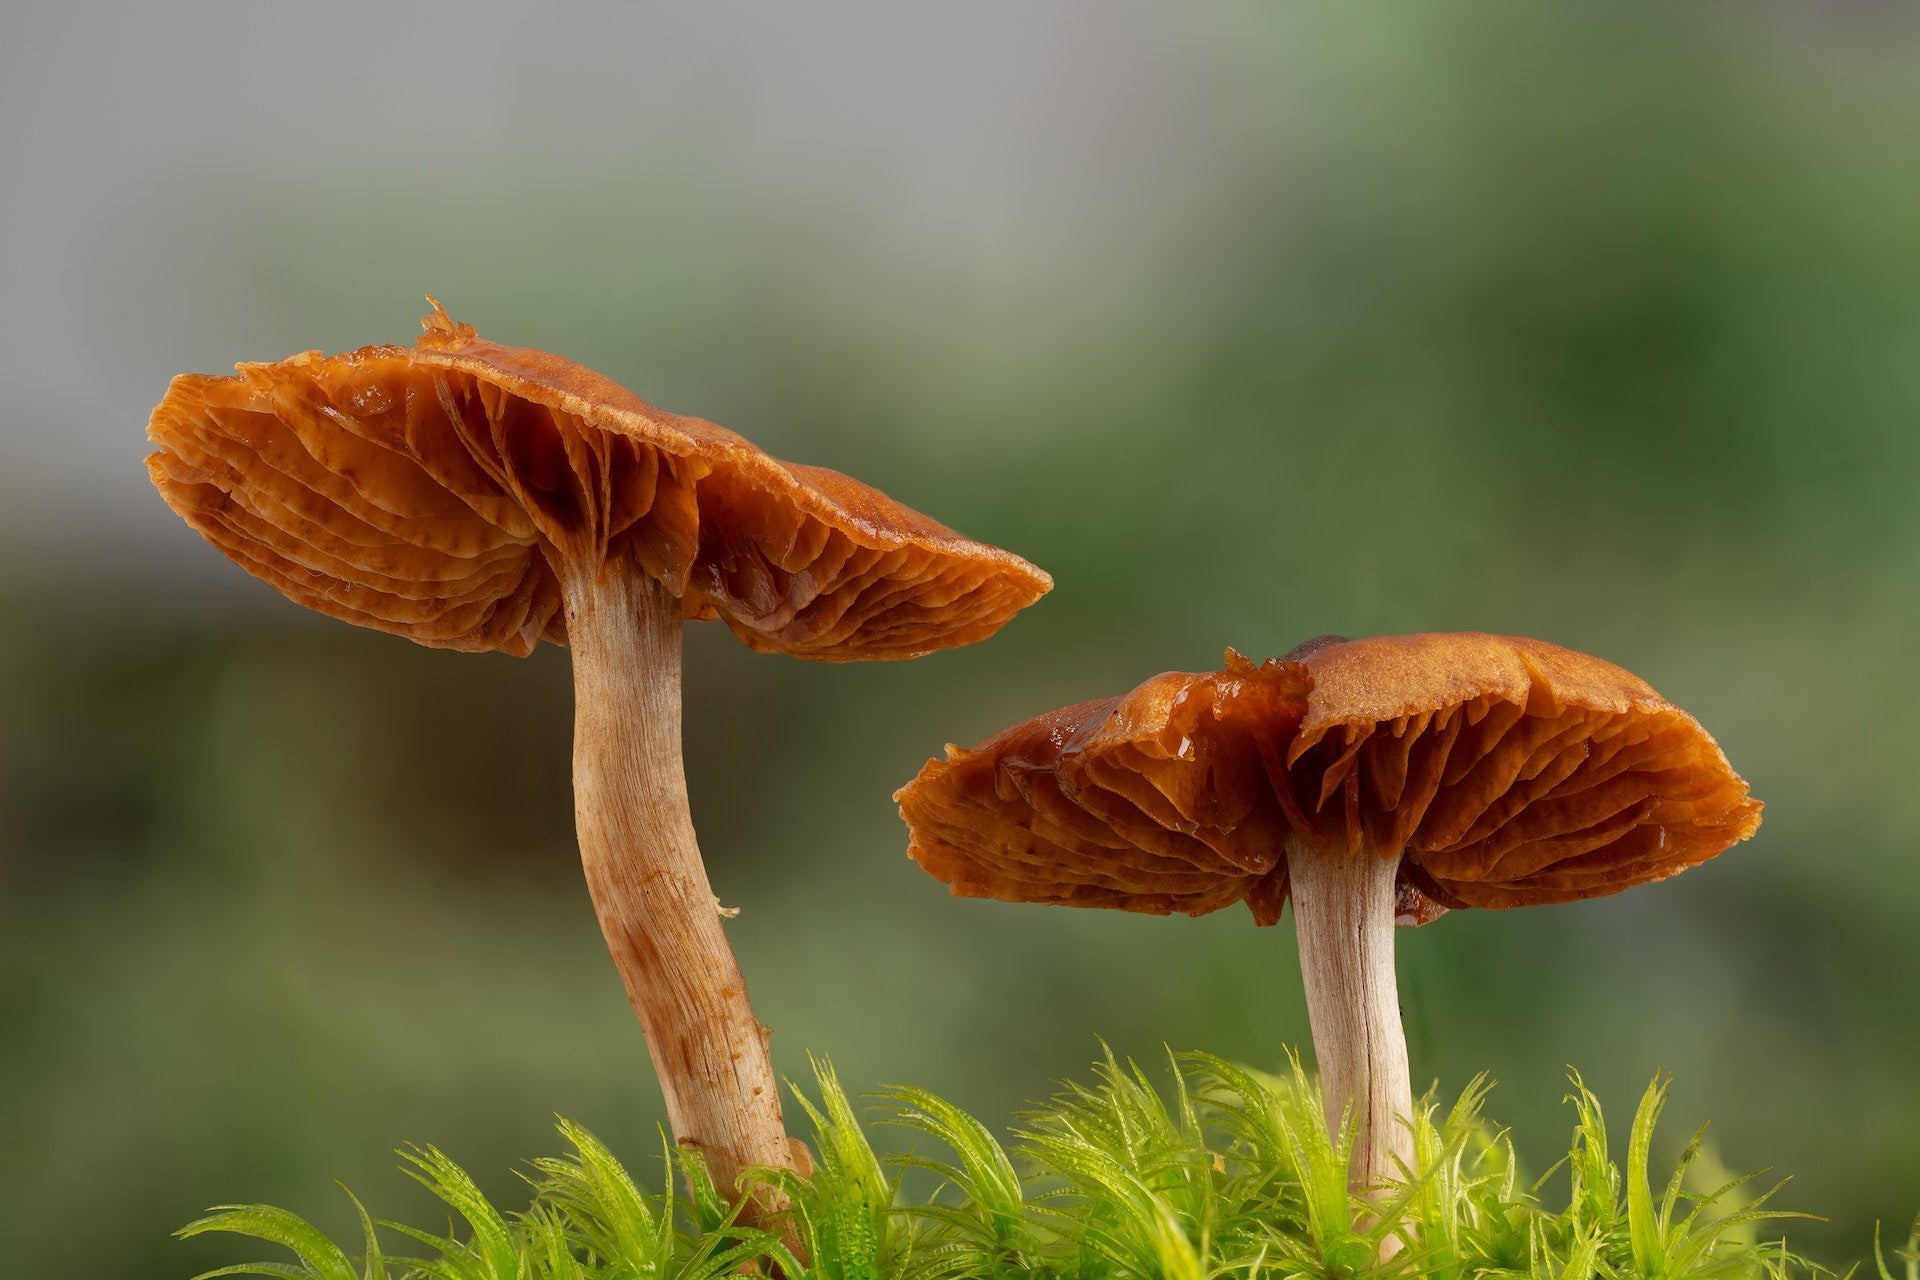 Adaptogenic Mushrooms: What are They, and What are the Benefits?